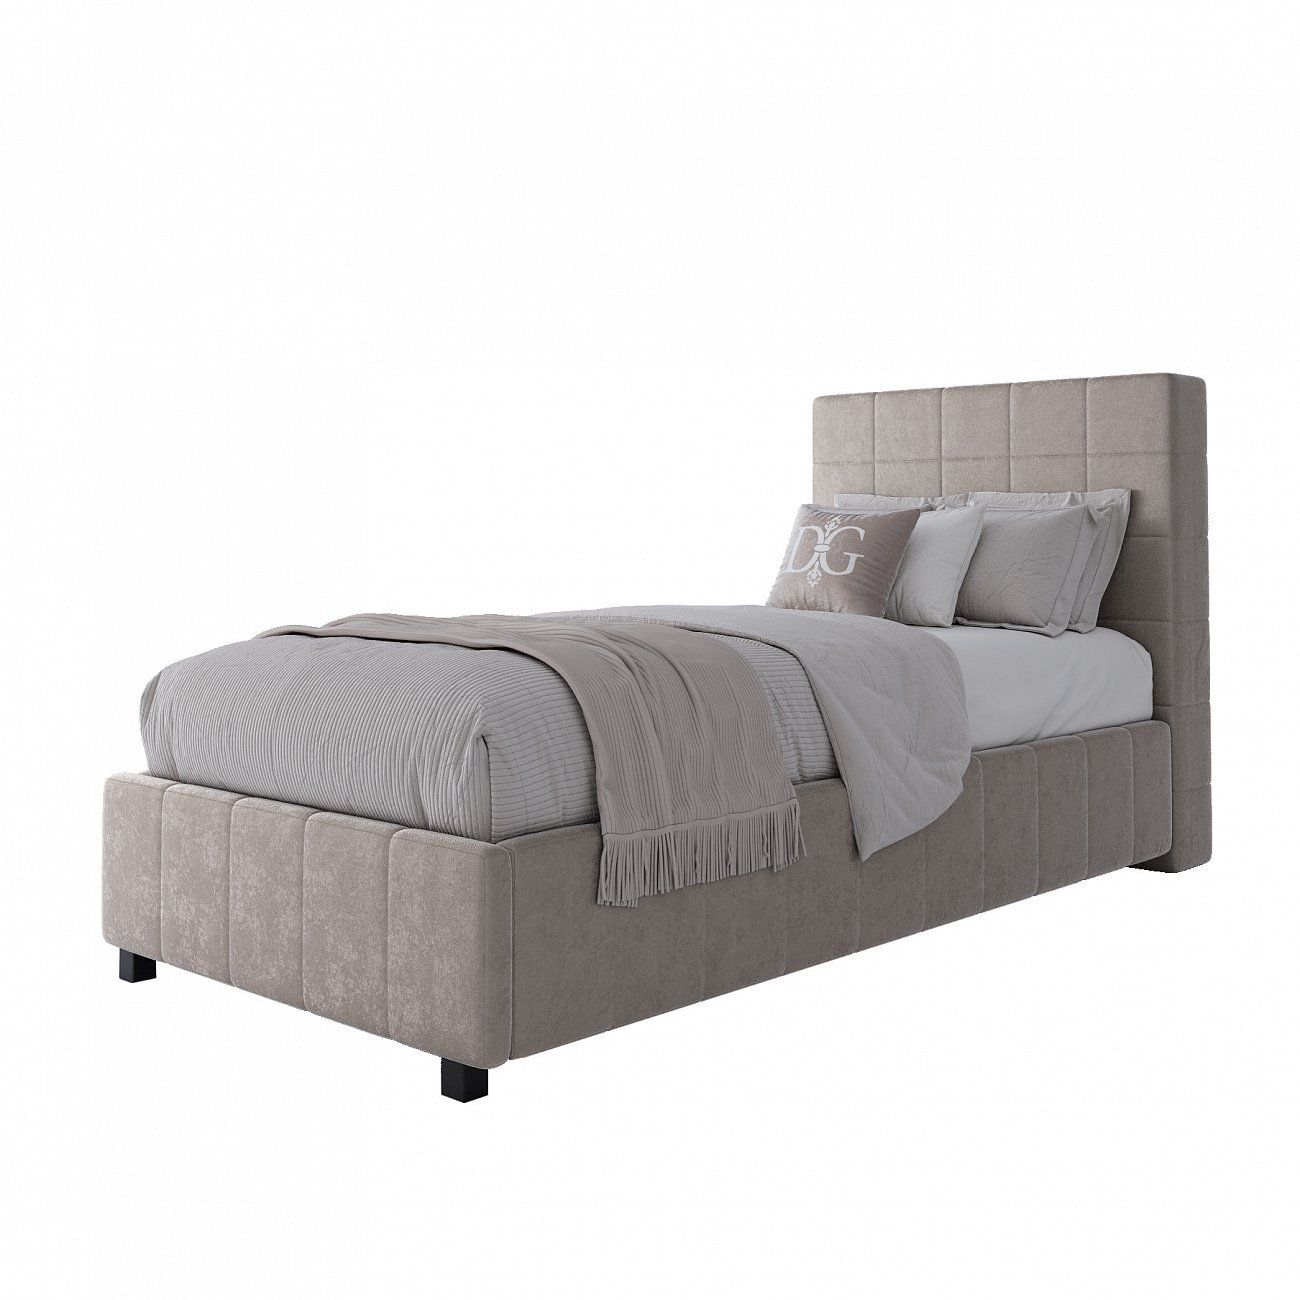 Bed with lifting mechanism 90x200 cm velour light beige P Shining Modern